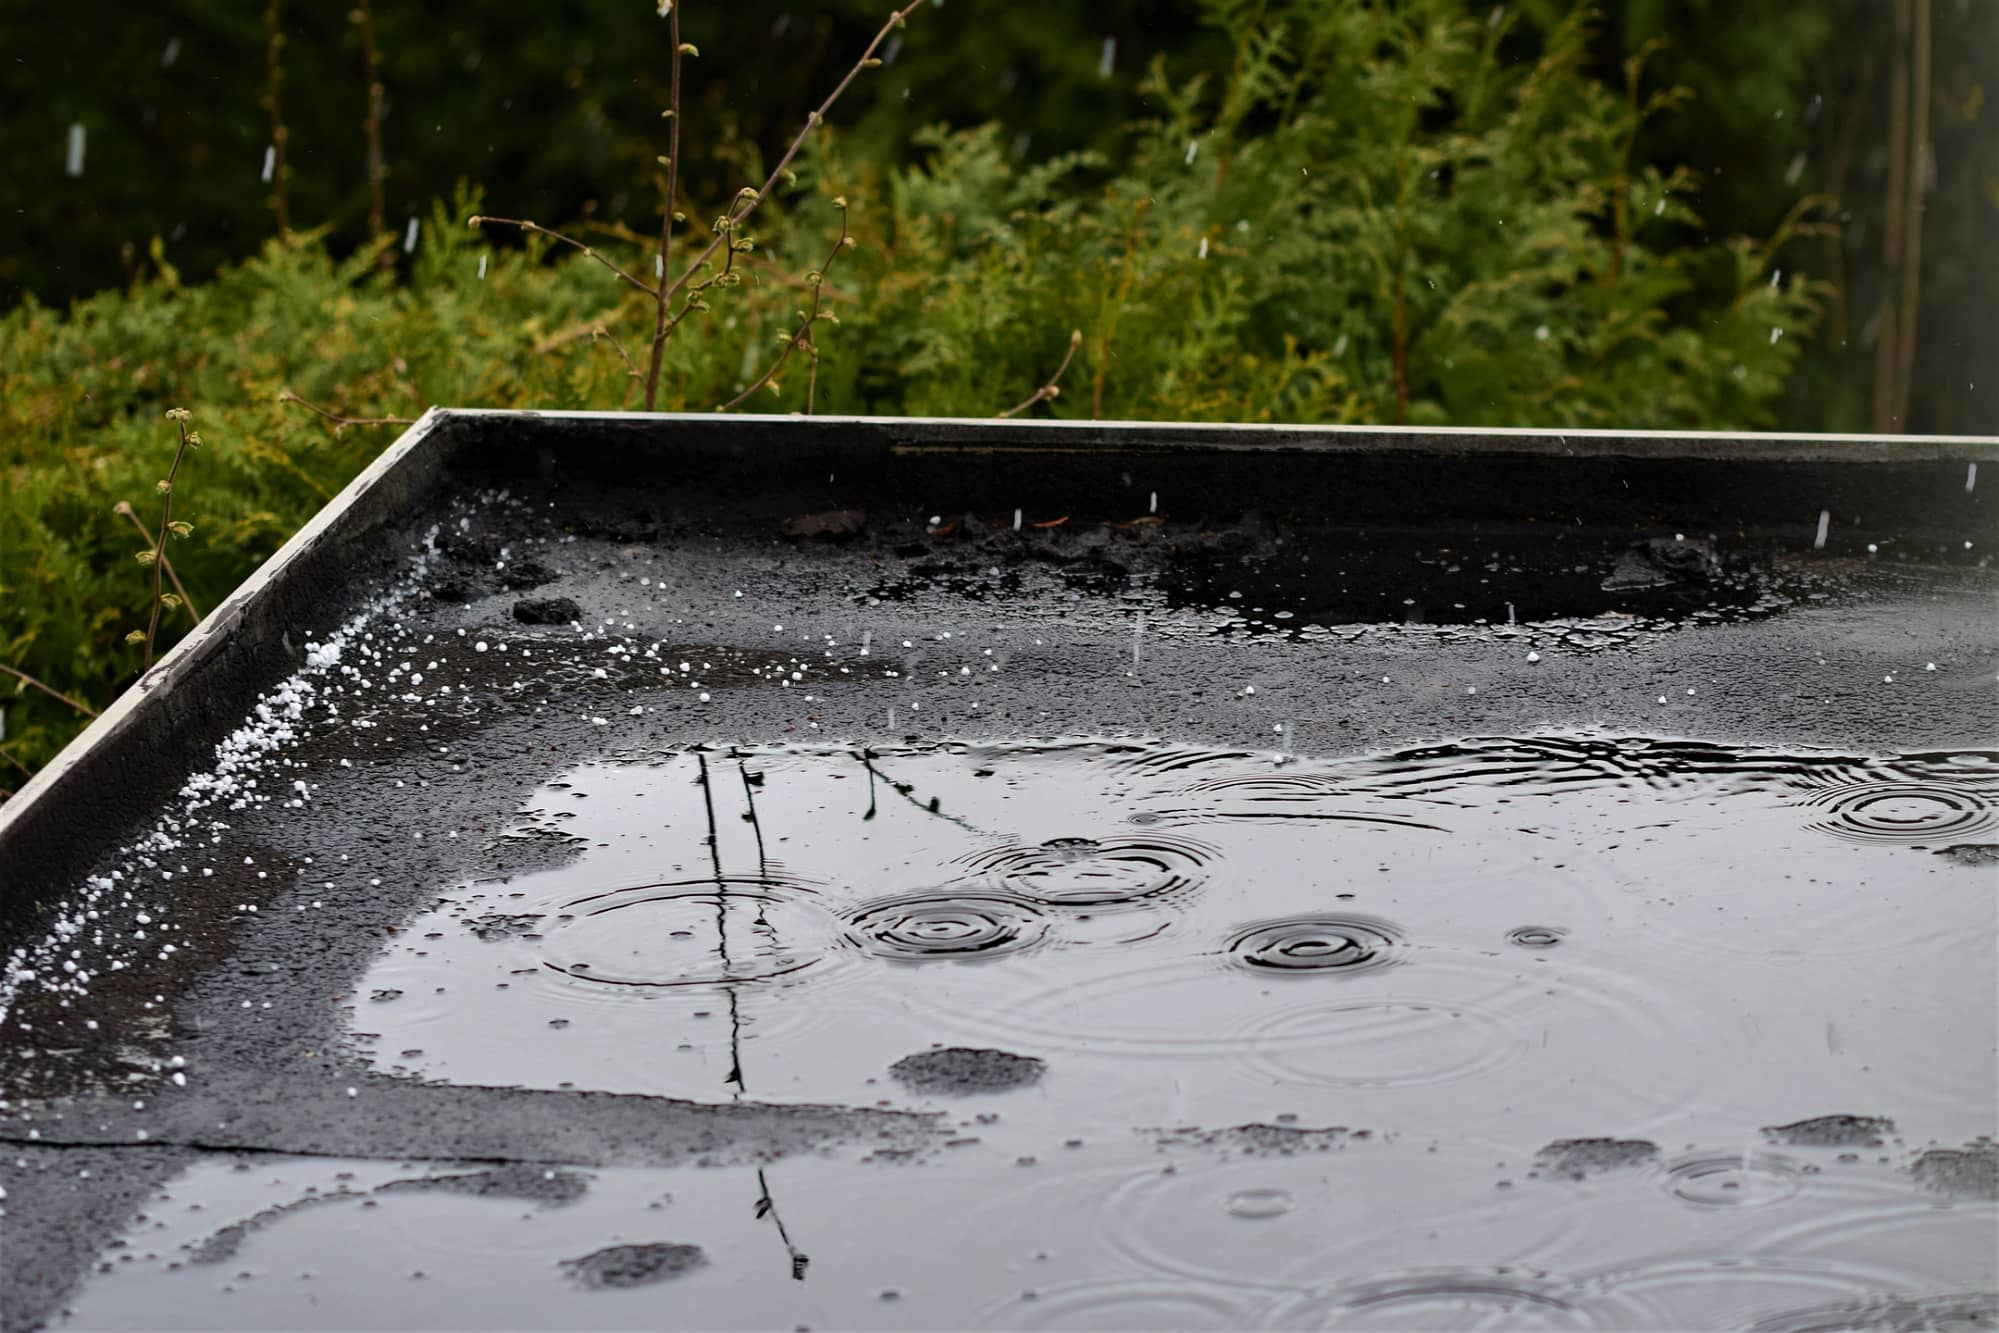 rain and hail falling on black commercial flat roof with trees behind